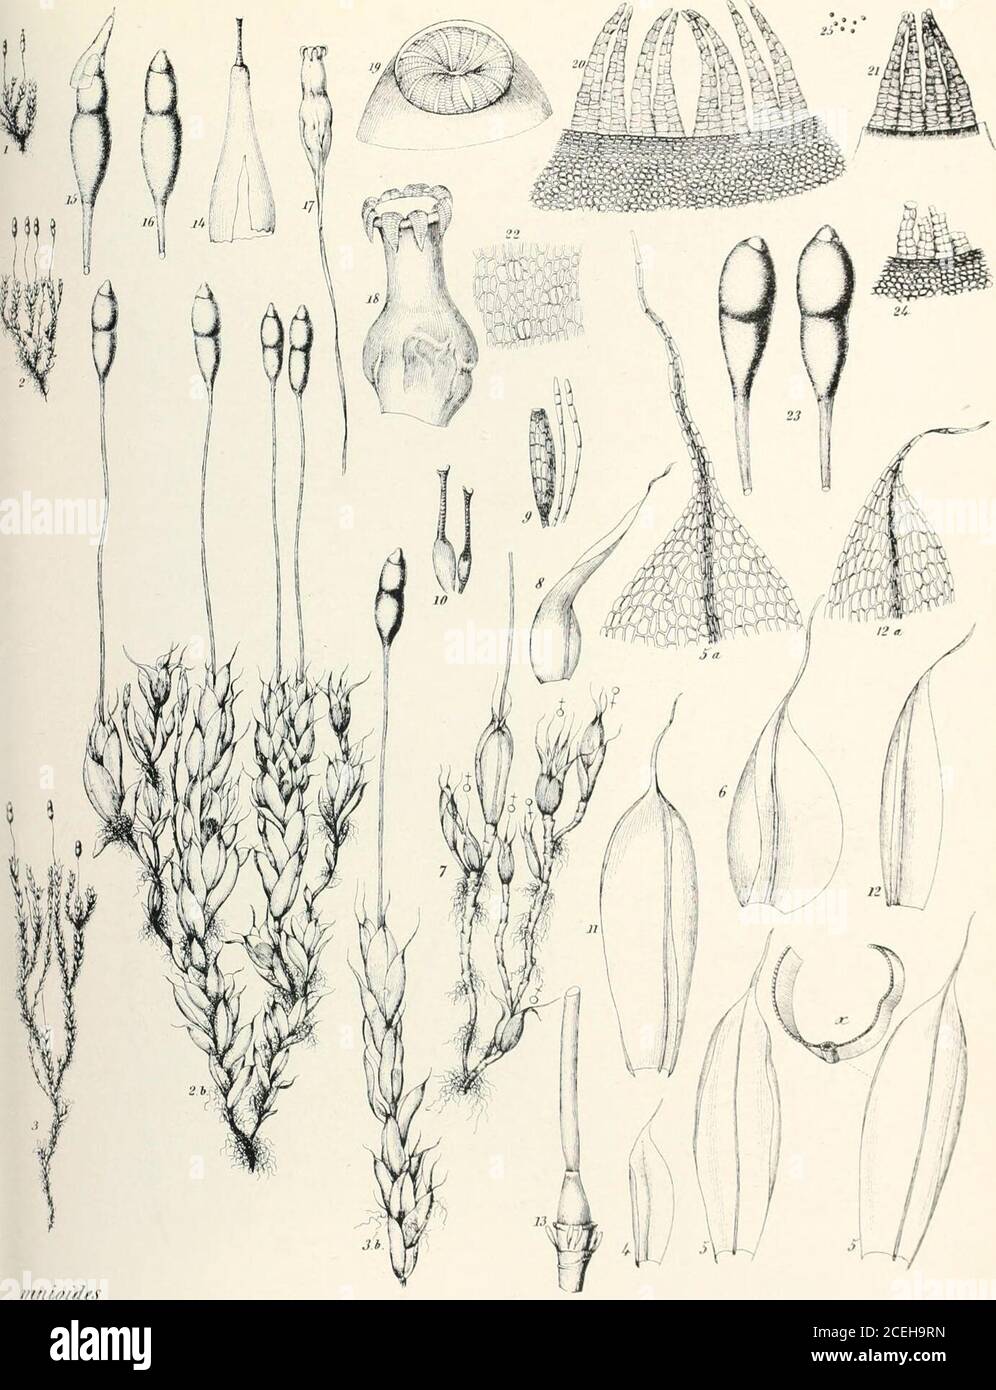 . Mosses with hand-lens and microscope : a non-technical hand-book of the more common mosses of the northeastern United States. iniiioNif, PLATE XL. TitrapUnlon bryonies (From Brv. Eiir Splachnum miiioiJes.)22. Stomata troiii capsule wall. I90 MOSSES WITH HAND-LENS AND MICROSCOPE This species is widely distributed in swamps throughout our region, but israther rare. When found, it is often growing on cow dung. S. luteum Mont, is a very rare species with an enormous yelUiw umbrella-shaped hypophysis. S. rubrum Mont, is another very rare species with a similar purple hypophysis. TETRAPLODON B. & Stock Photo